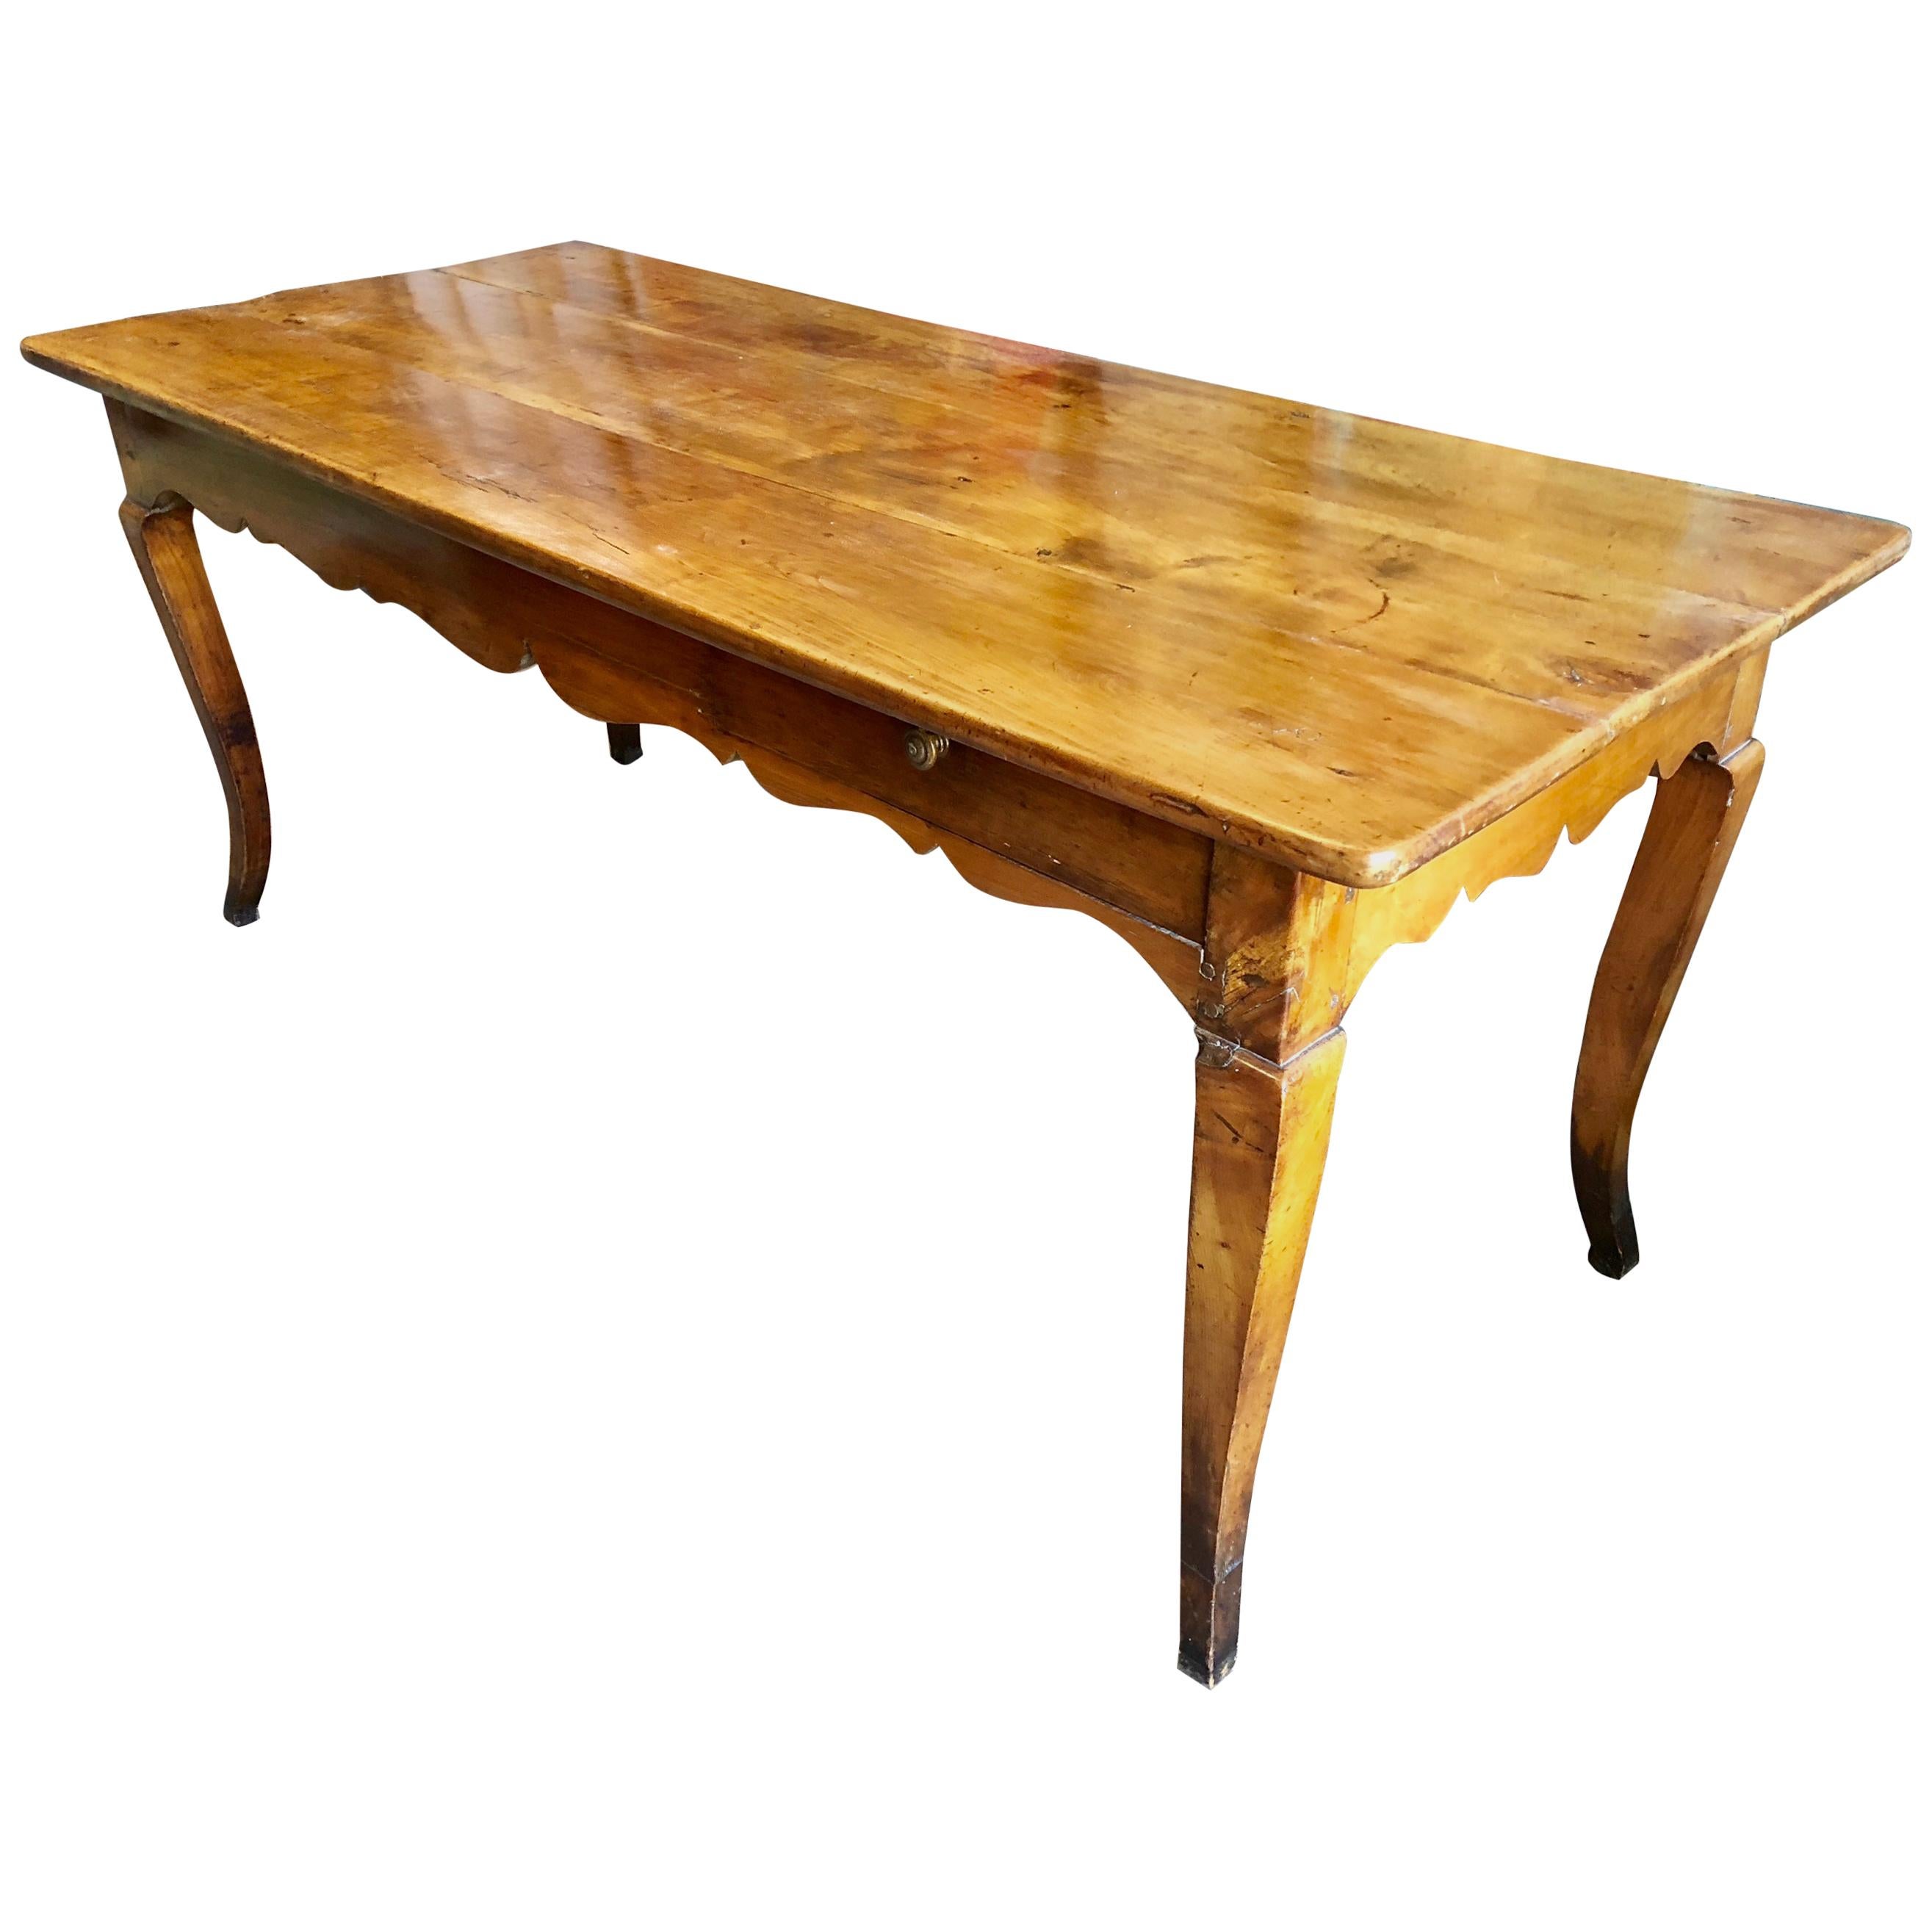 French Country Cherrywood Farm Table, 18th Century